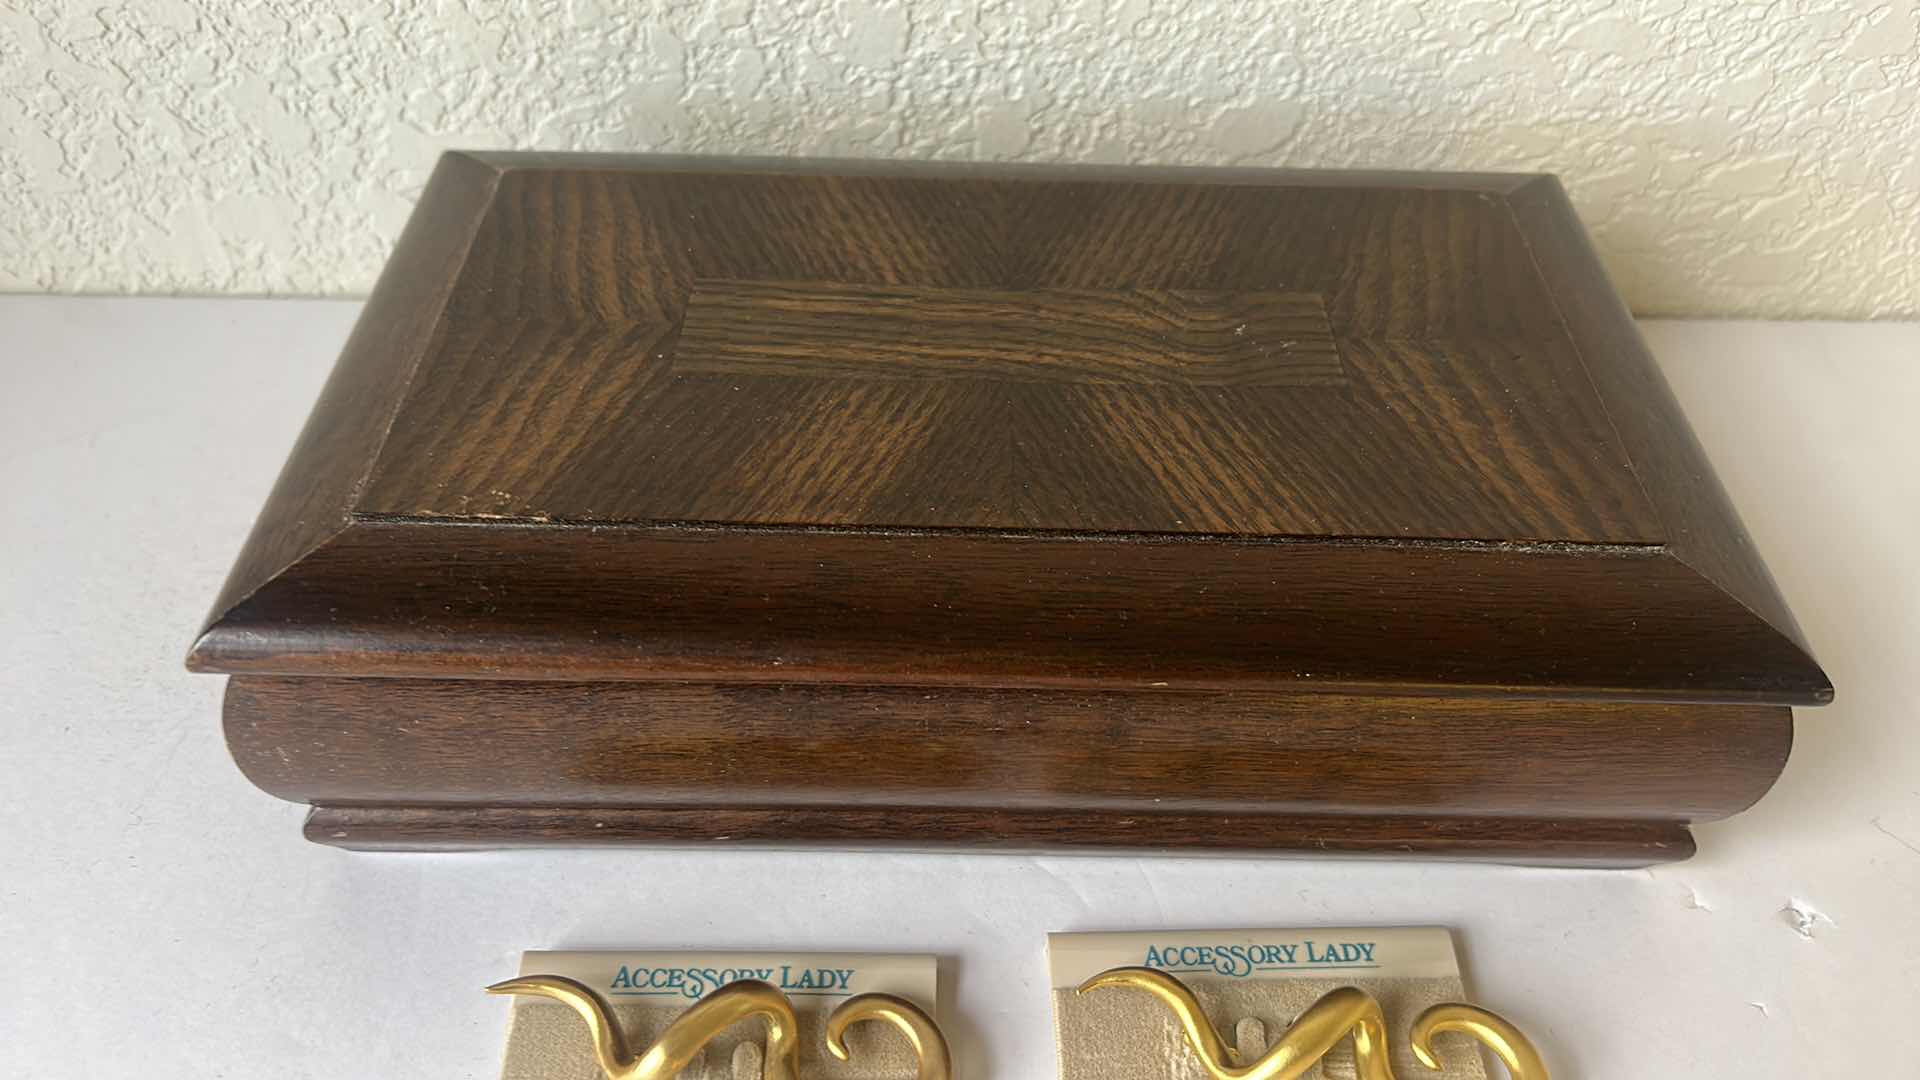 Photo 4 of VINTAGE JEWELRY BOX AND 3 PINS